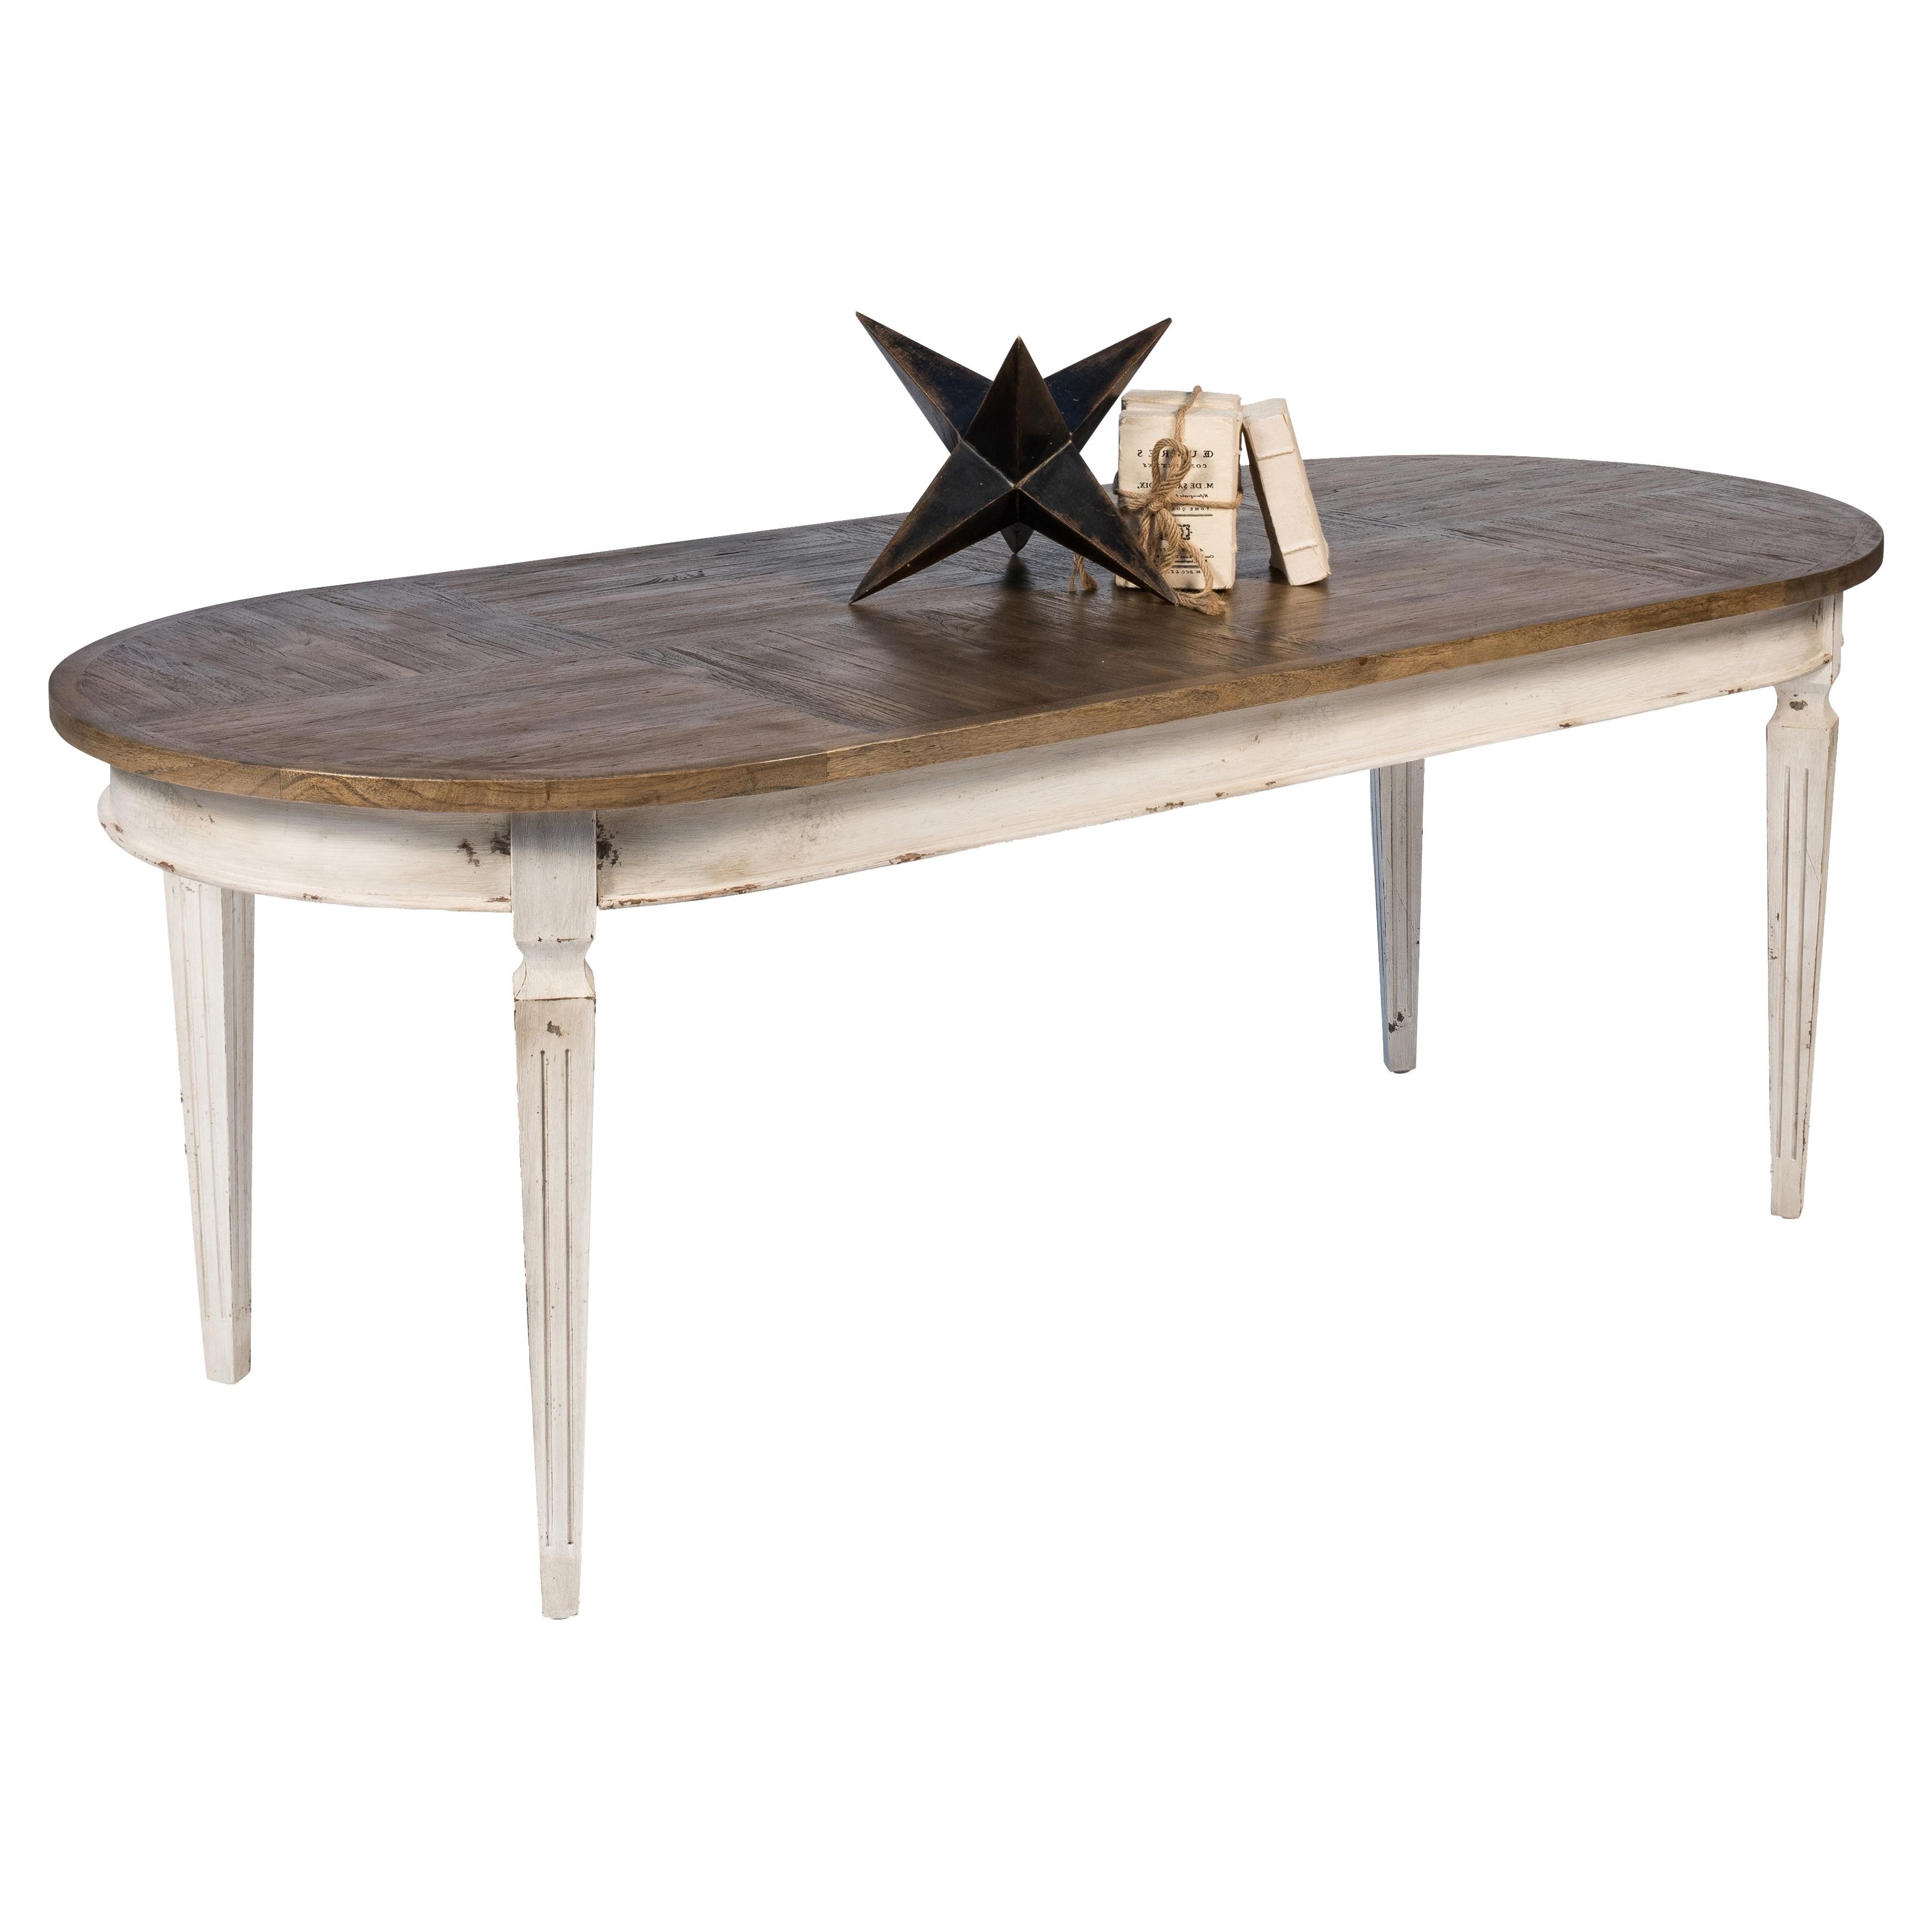 Kathy Kuo Home In Most Popular Natural Wood & Recycled Elm 87 Inch Dining Tables (View 12 of 25)